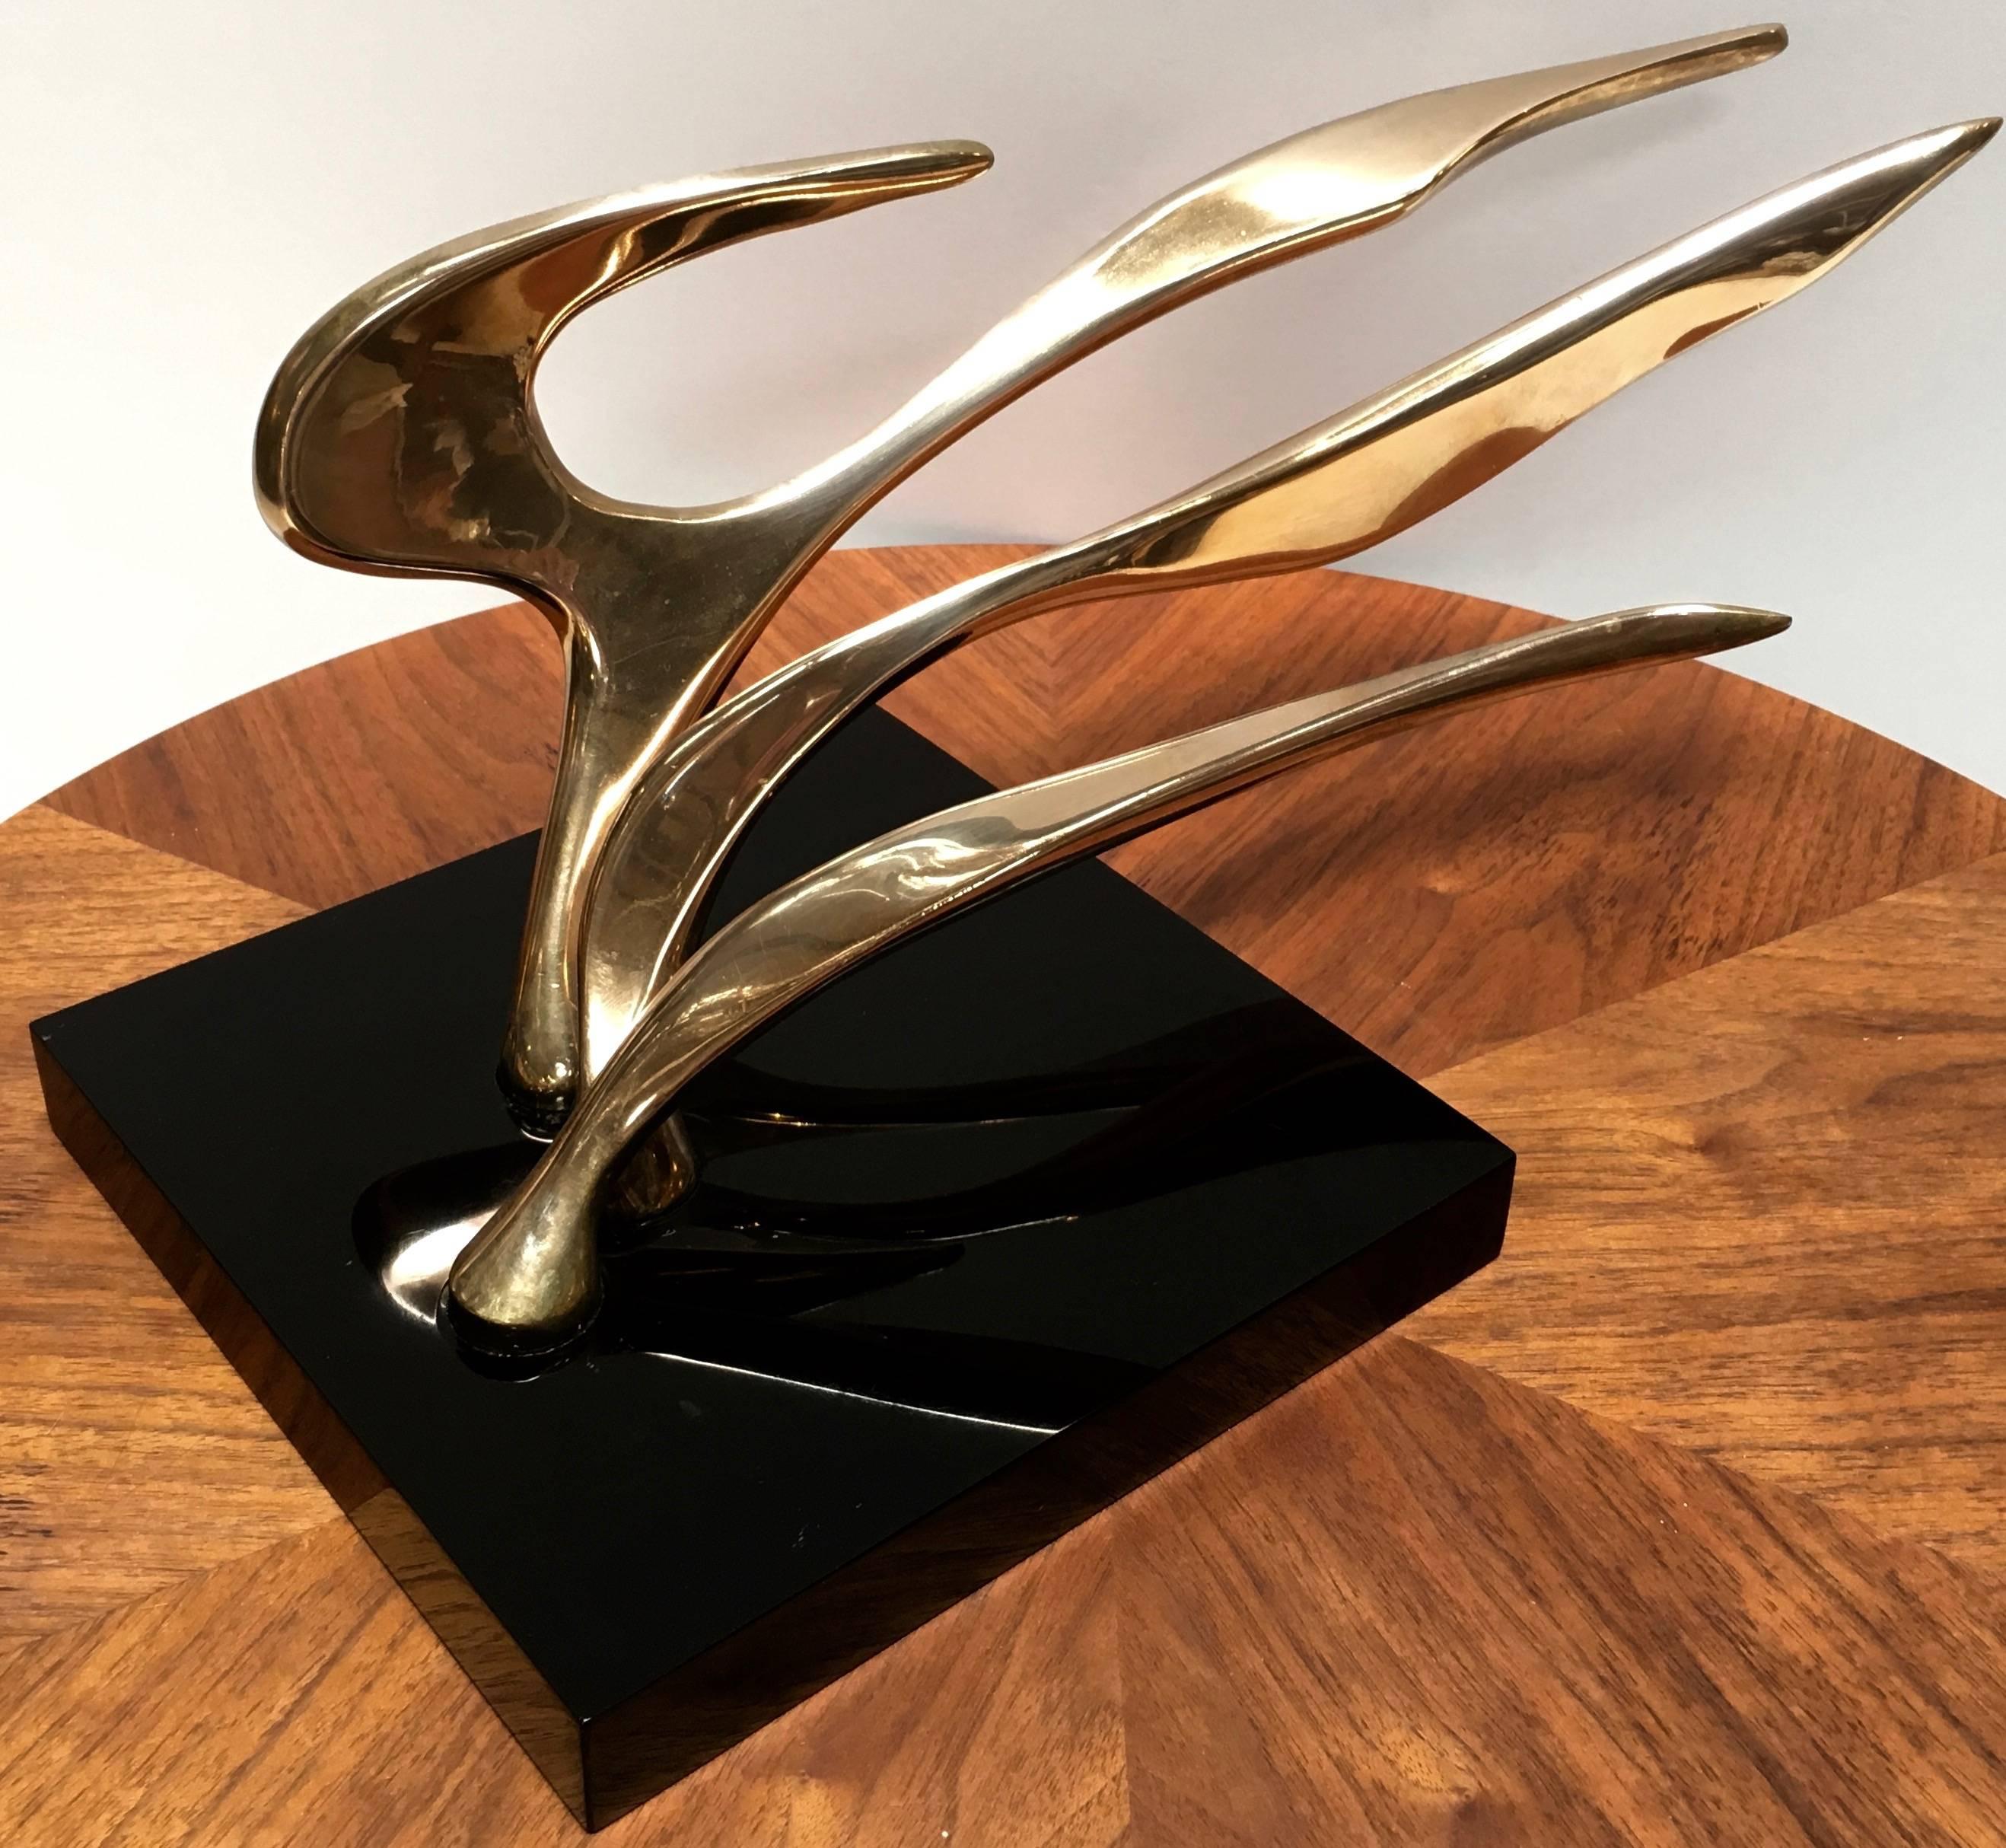 Three solid pieces of free flowing patinated brass, beautifully sculpted and inset into a black acrylic base. Each piece appears to be blowing in the wind and is removable and interchangeable for several different looks to this wonderful sculpture.